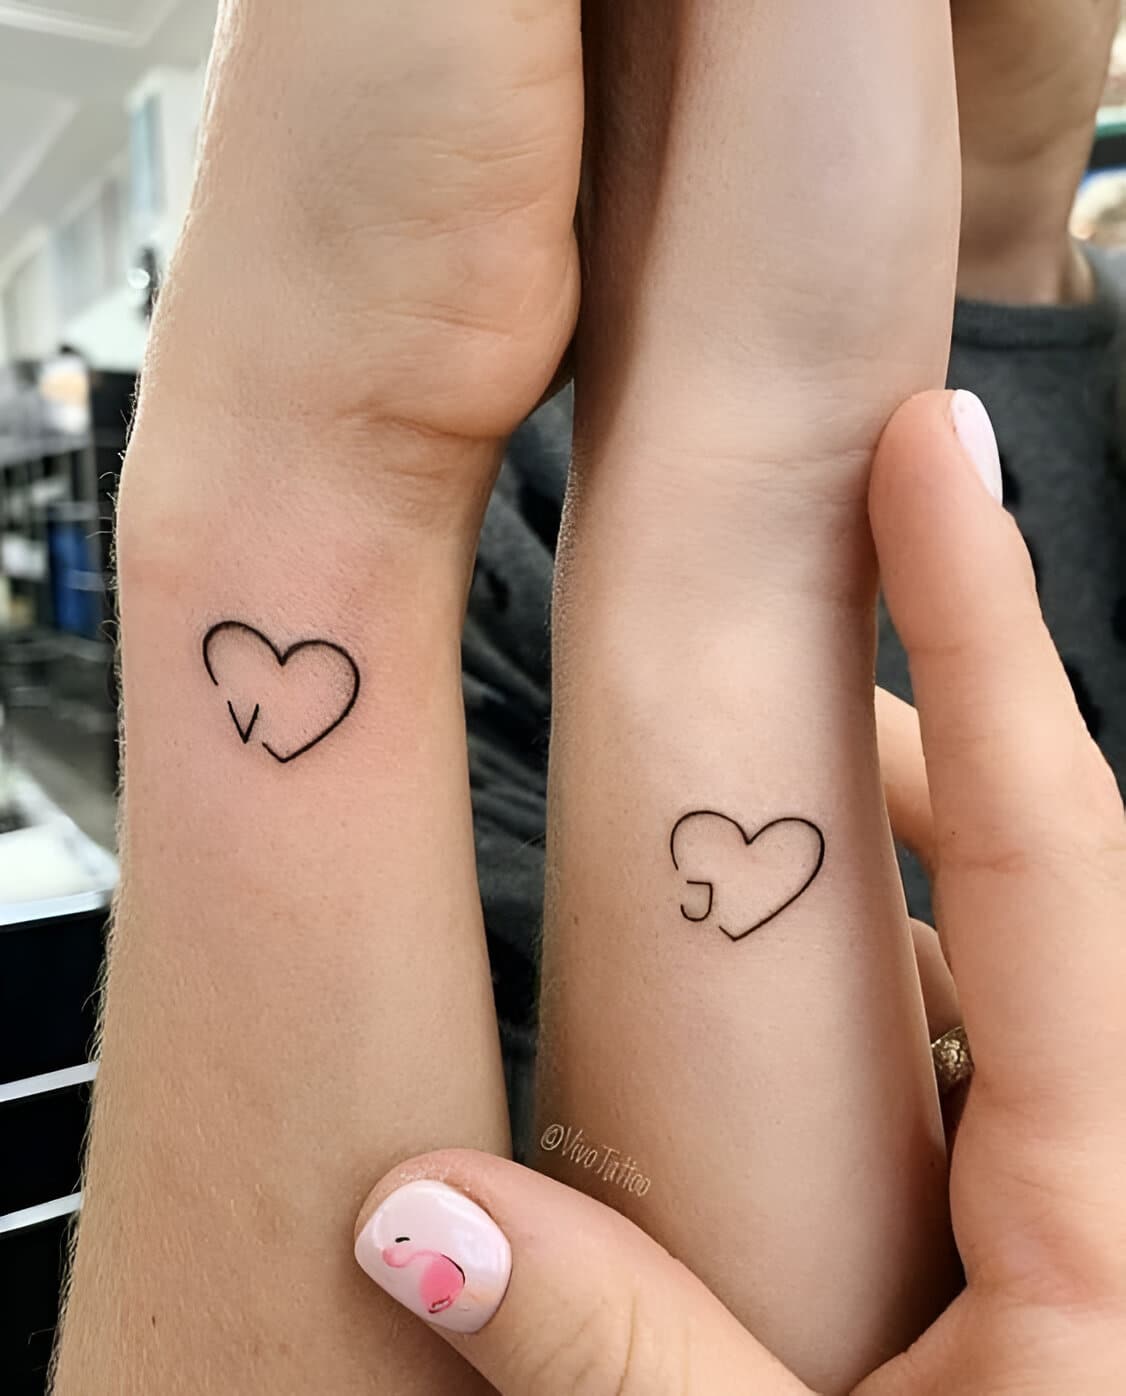 30 Elegant Matching Heart Tattoos To Get With Your Partner ASAP 15